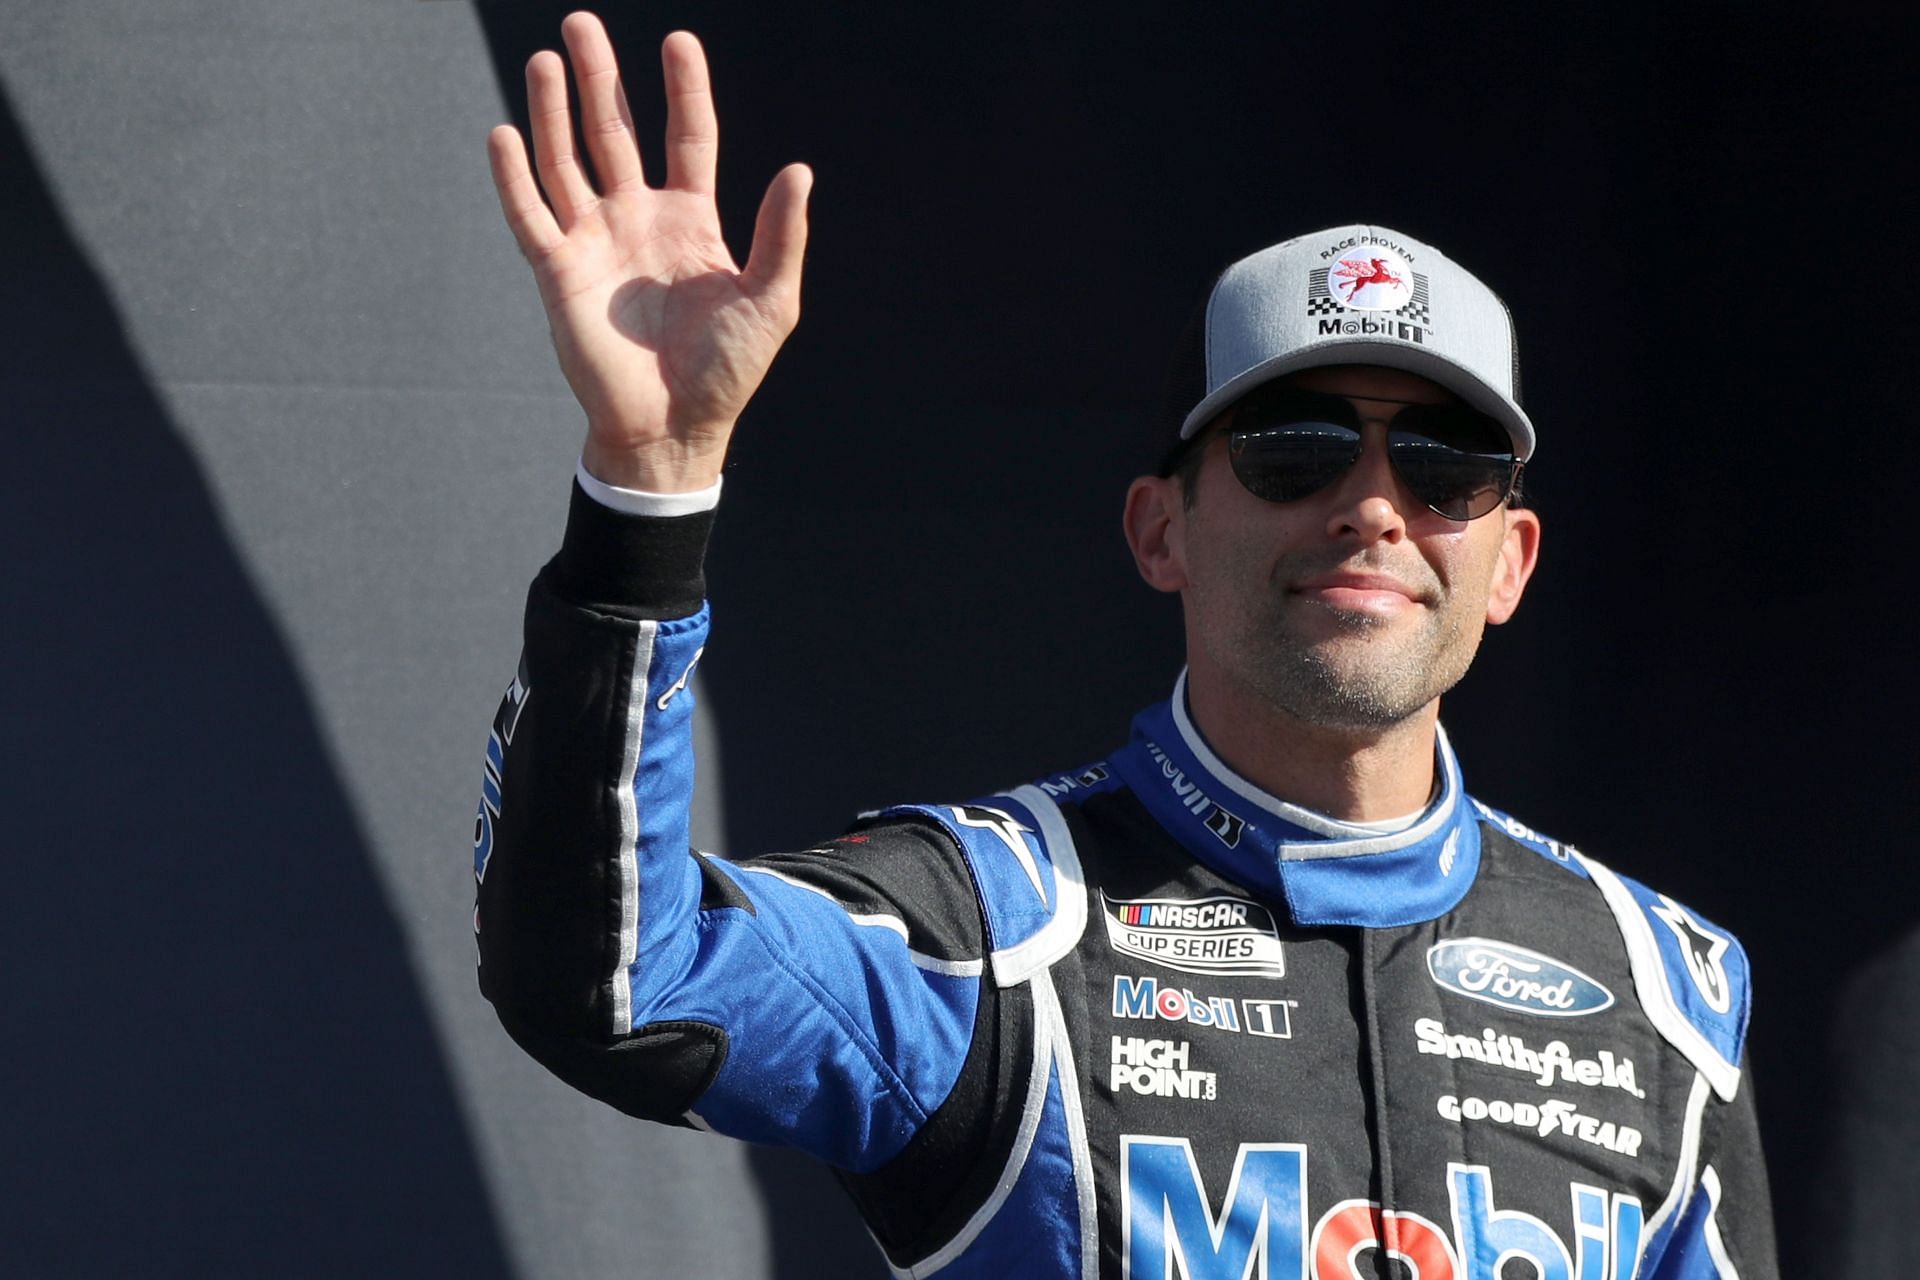 Aric Almirola, driver of the #10 Ford Mustang.